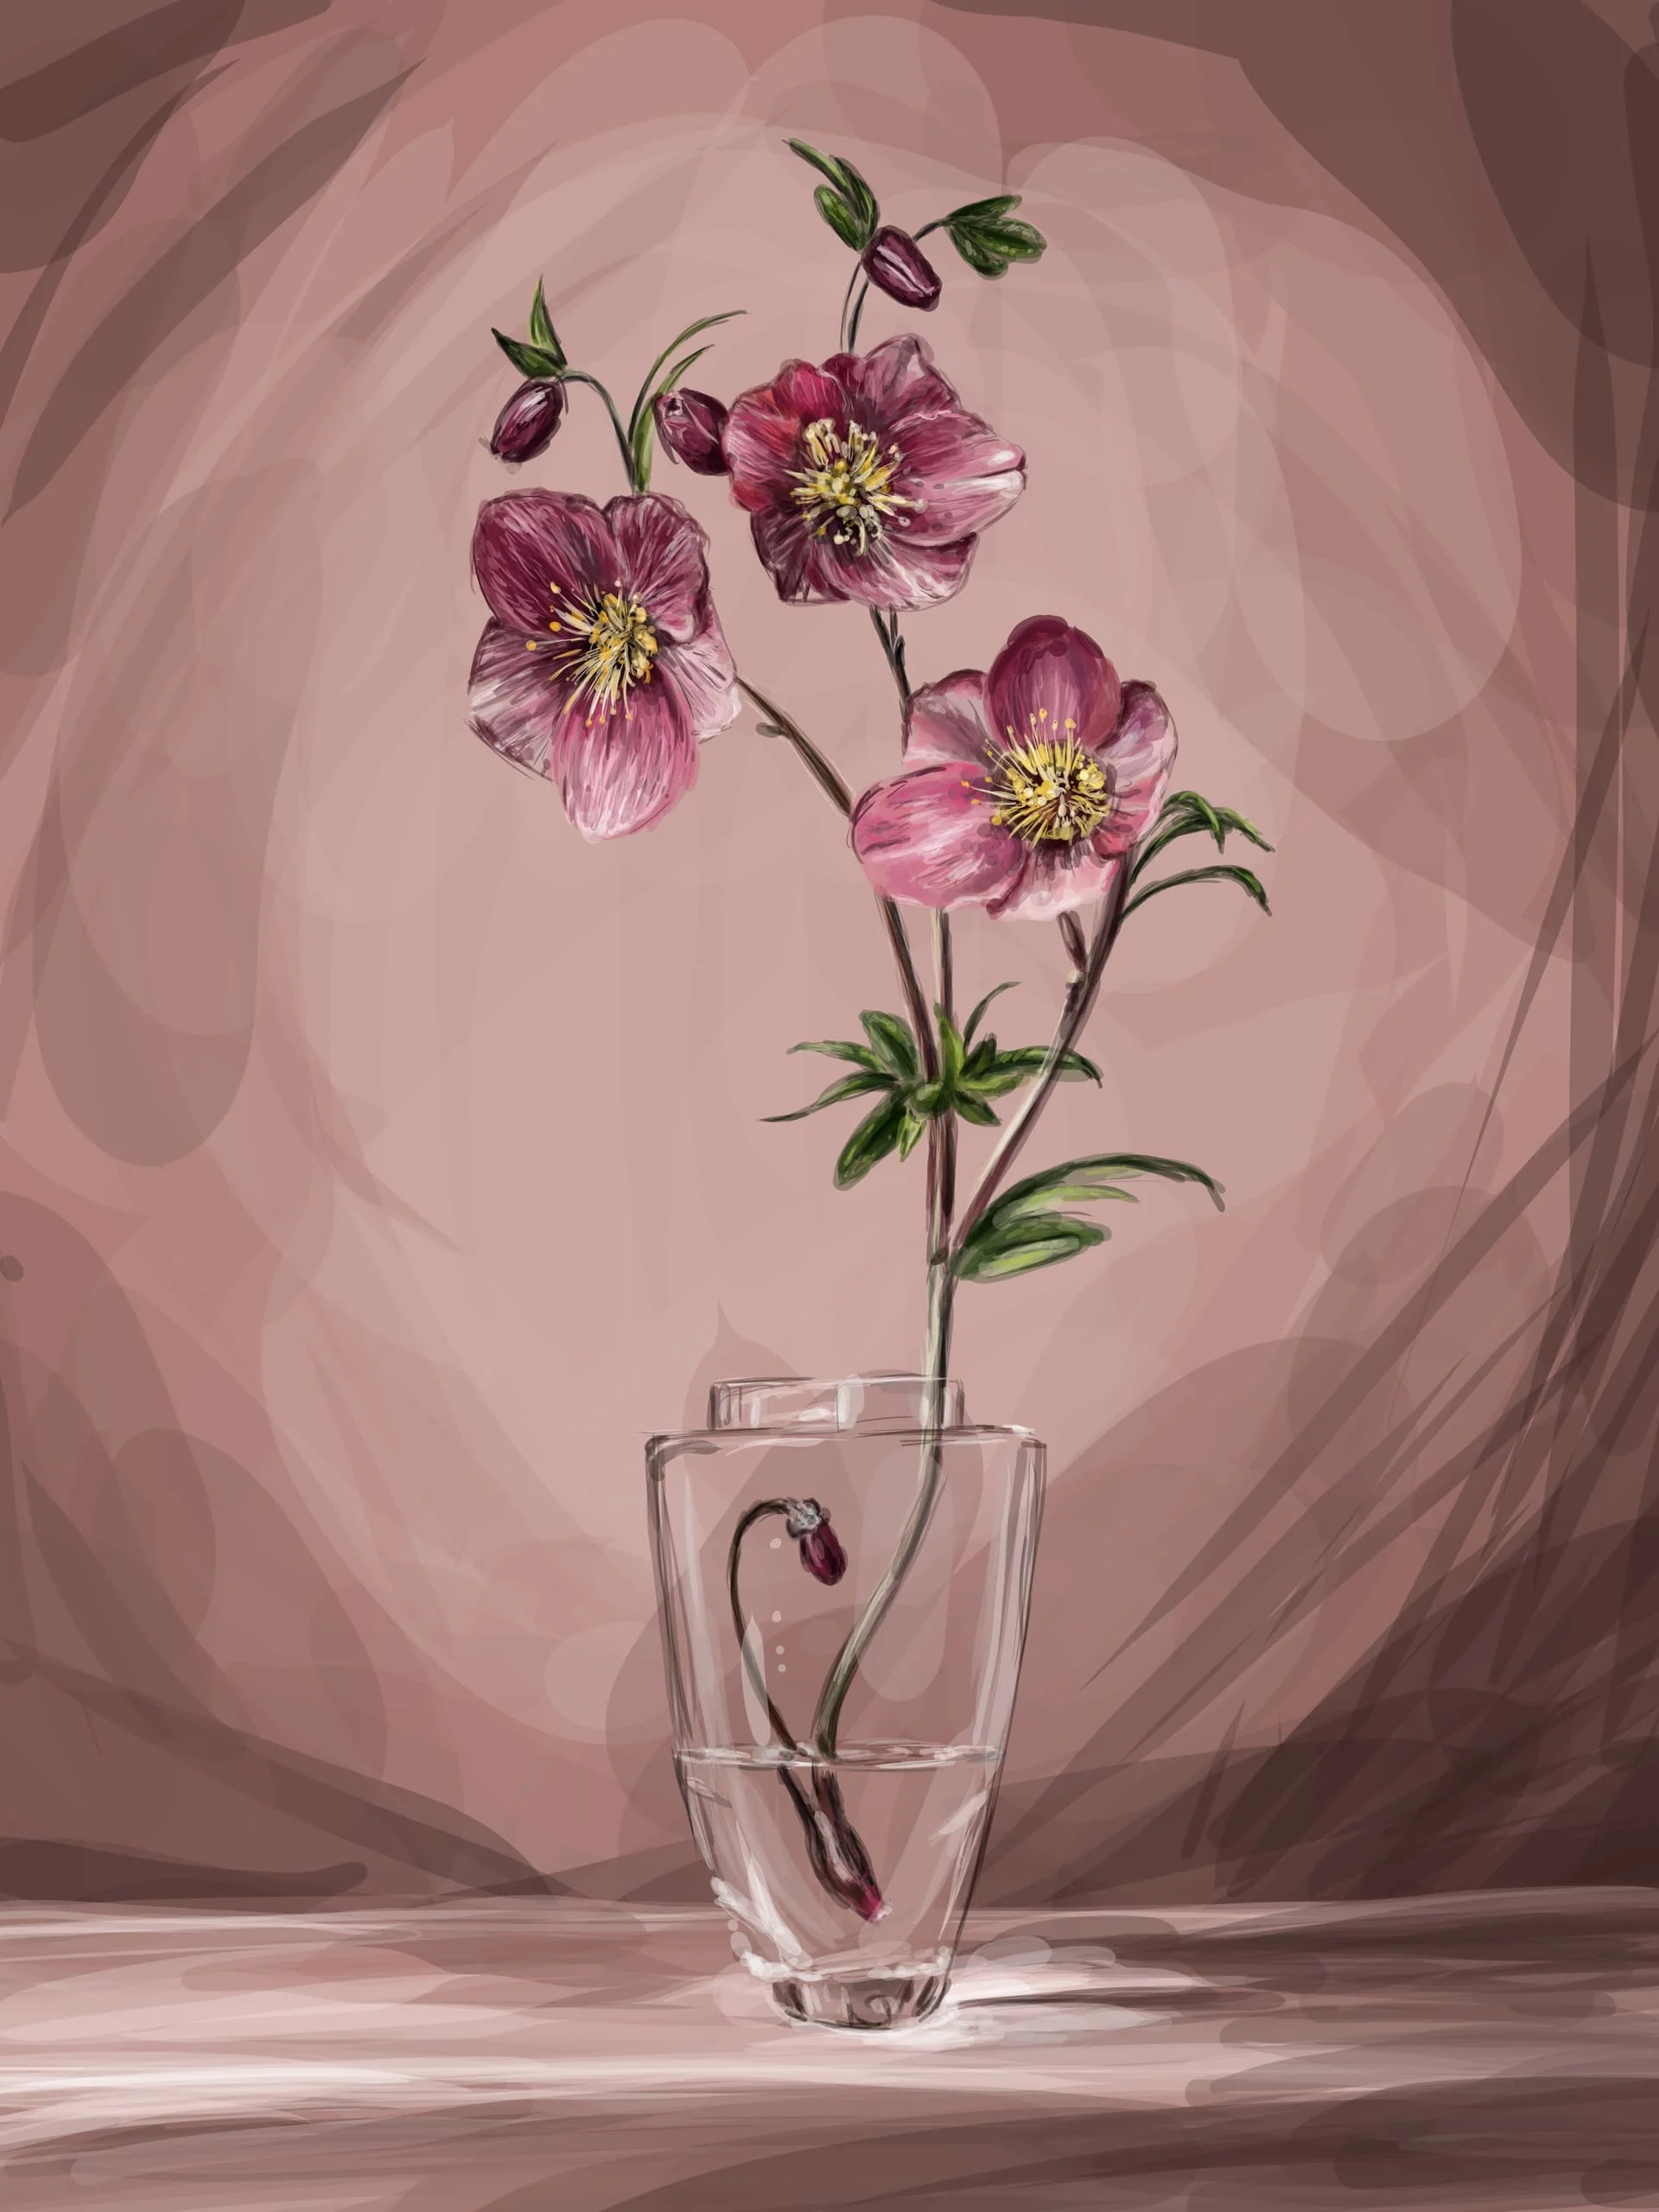 Wenentro, a color study of flowers, Krita